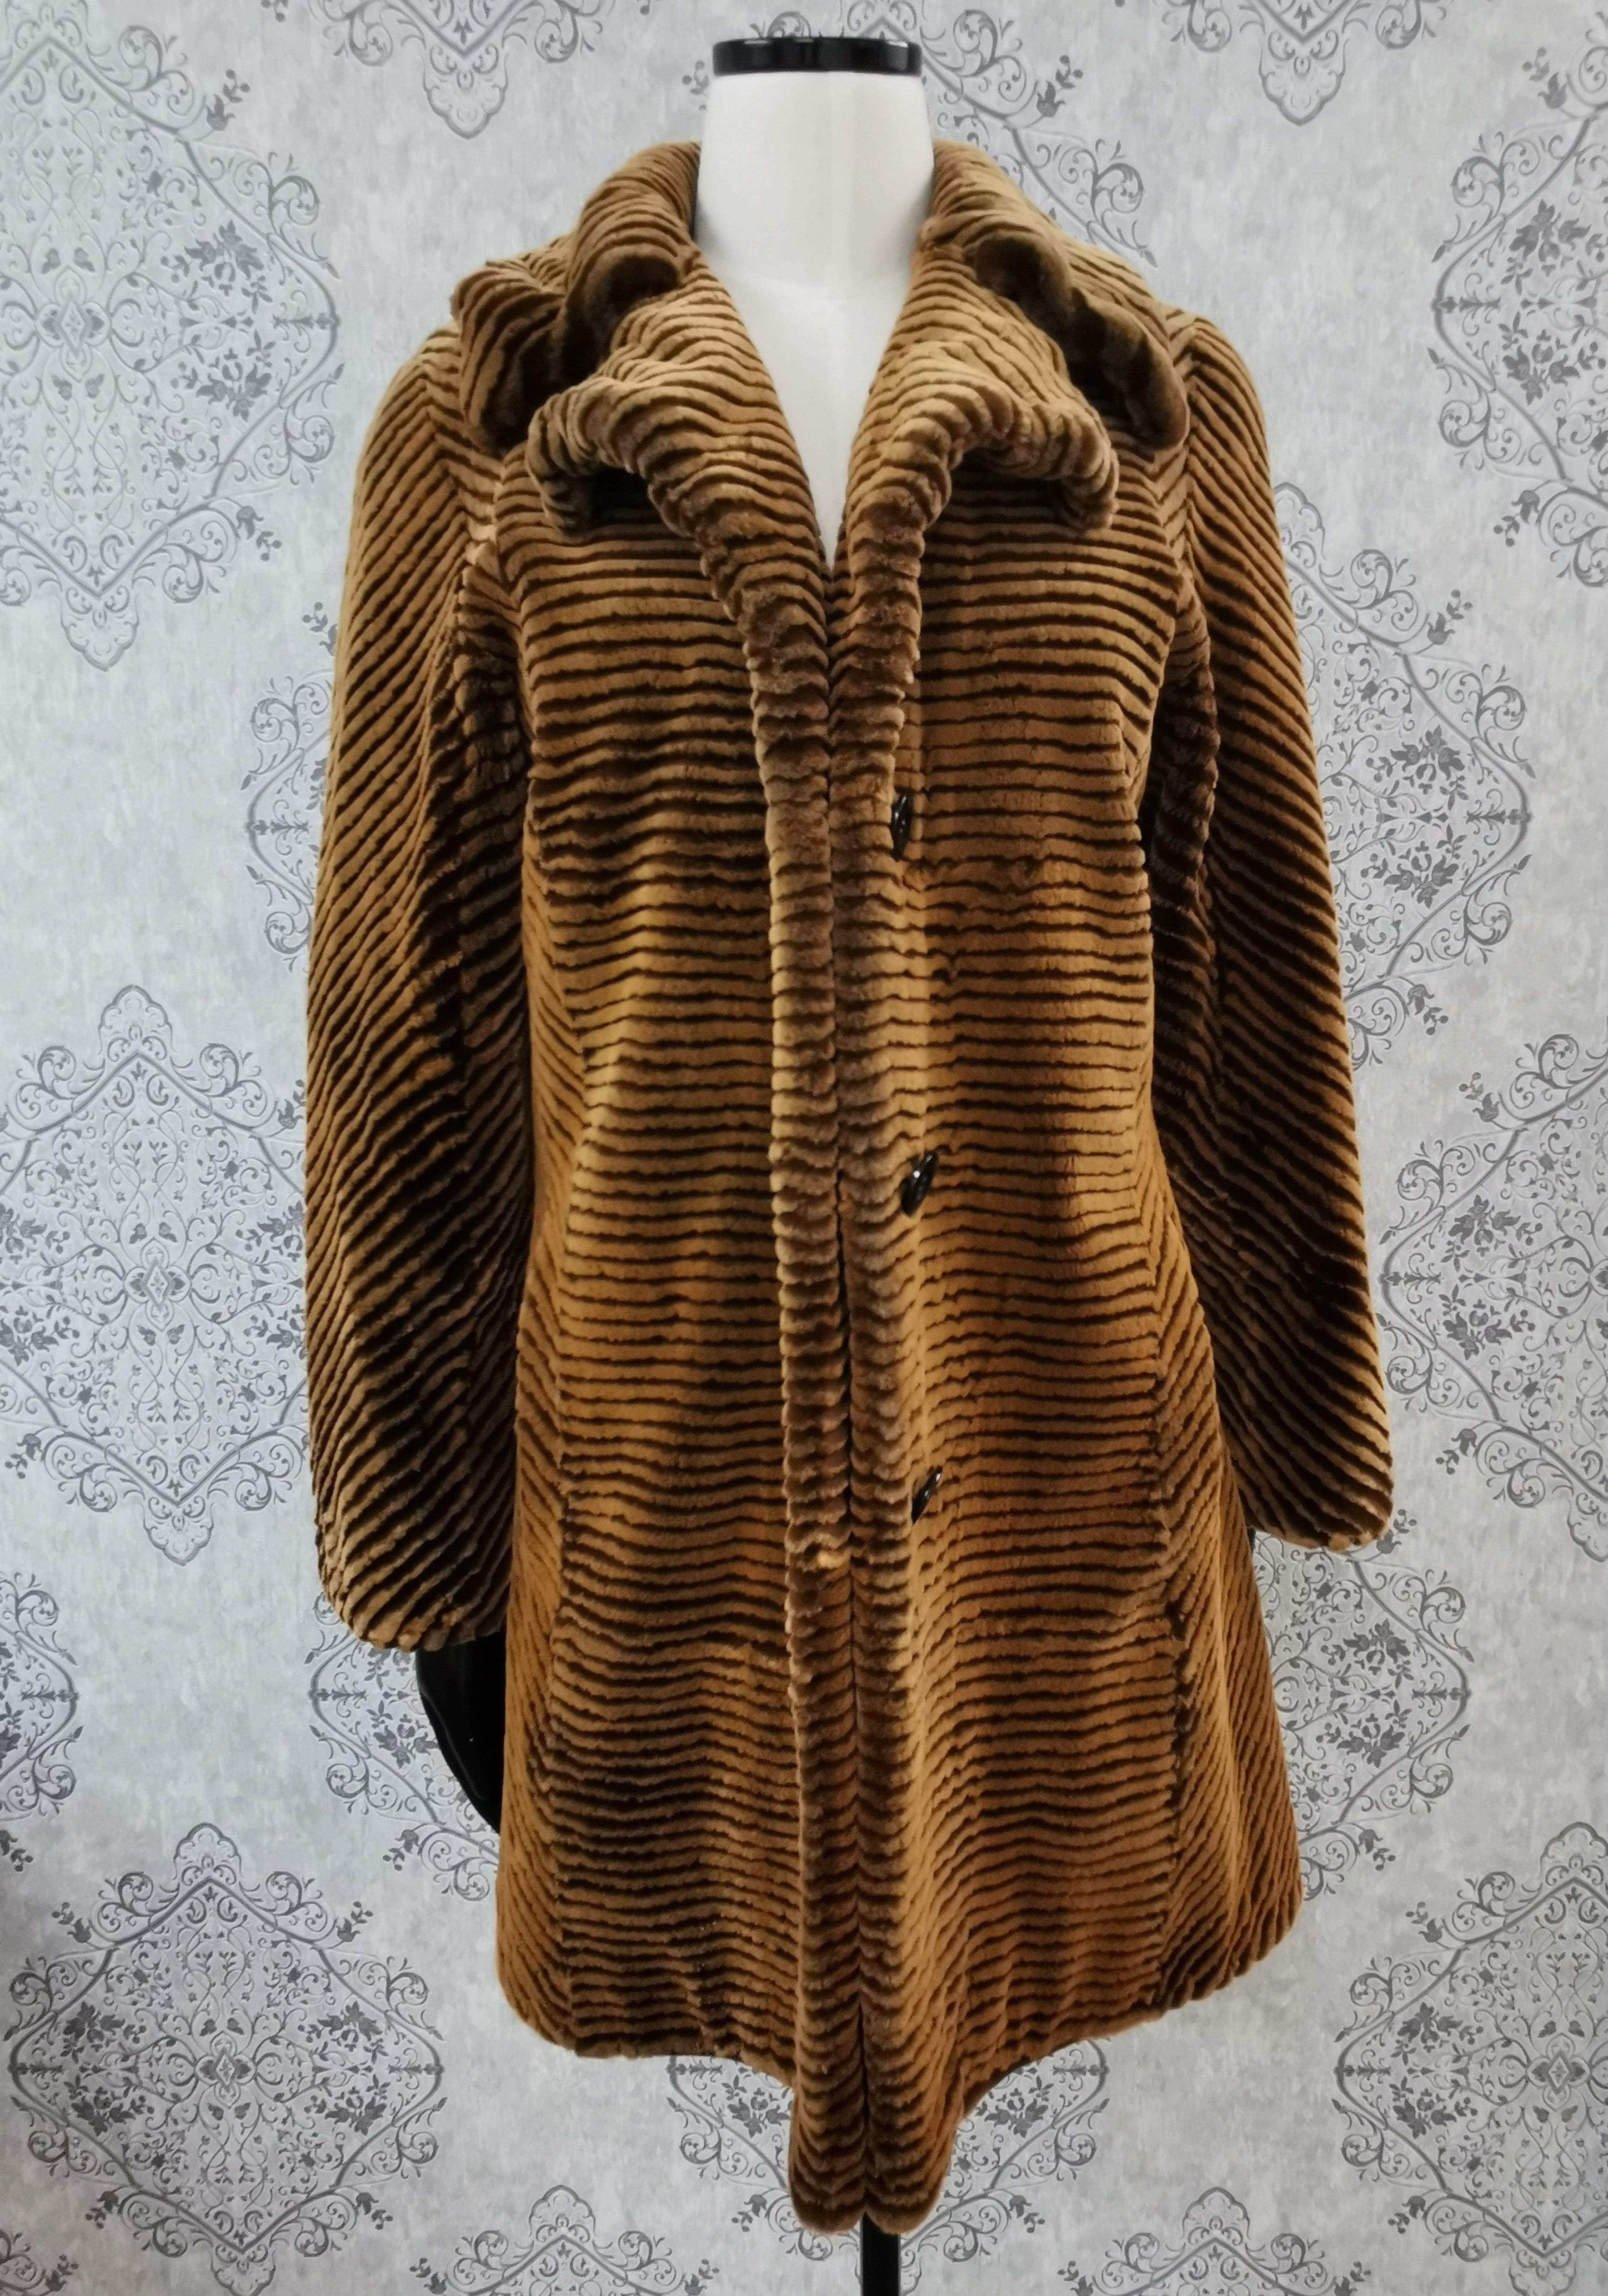 Louis Féraud Paris sheared mink fur coat with yellow and brown stripes (Size 6 - Small) in excellent condition

Single breasted three buttons notch lapel collar, straight sleeves and signature Féraud satin lining.

Made in